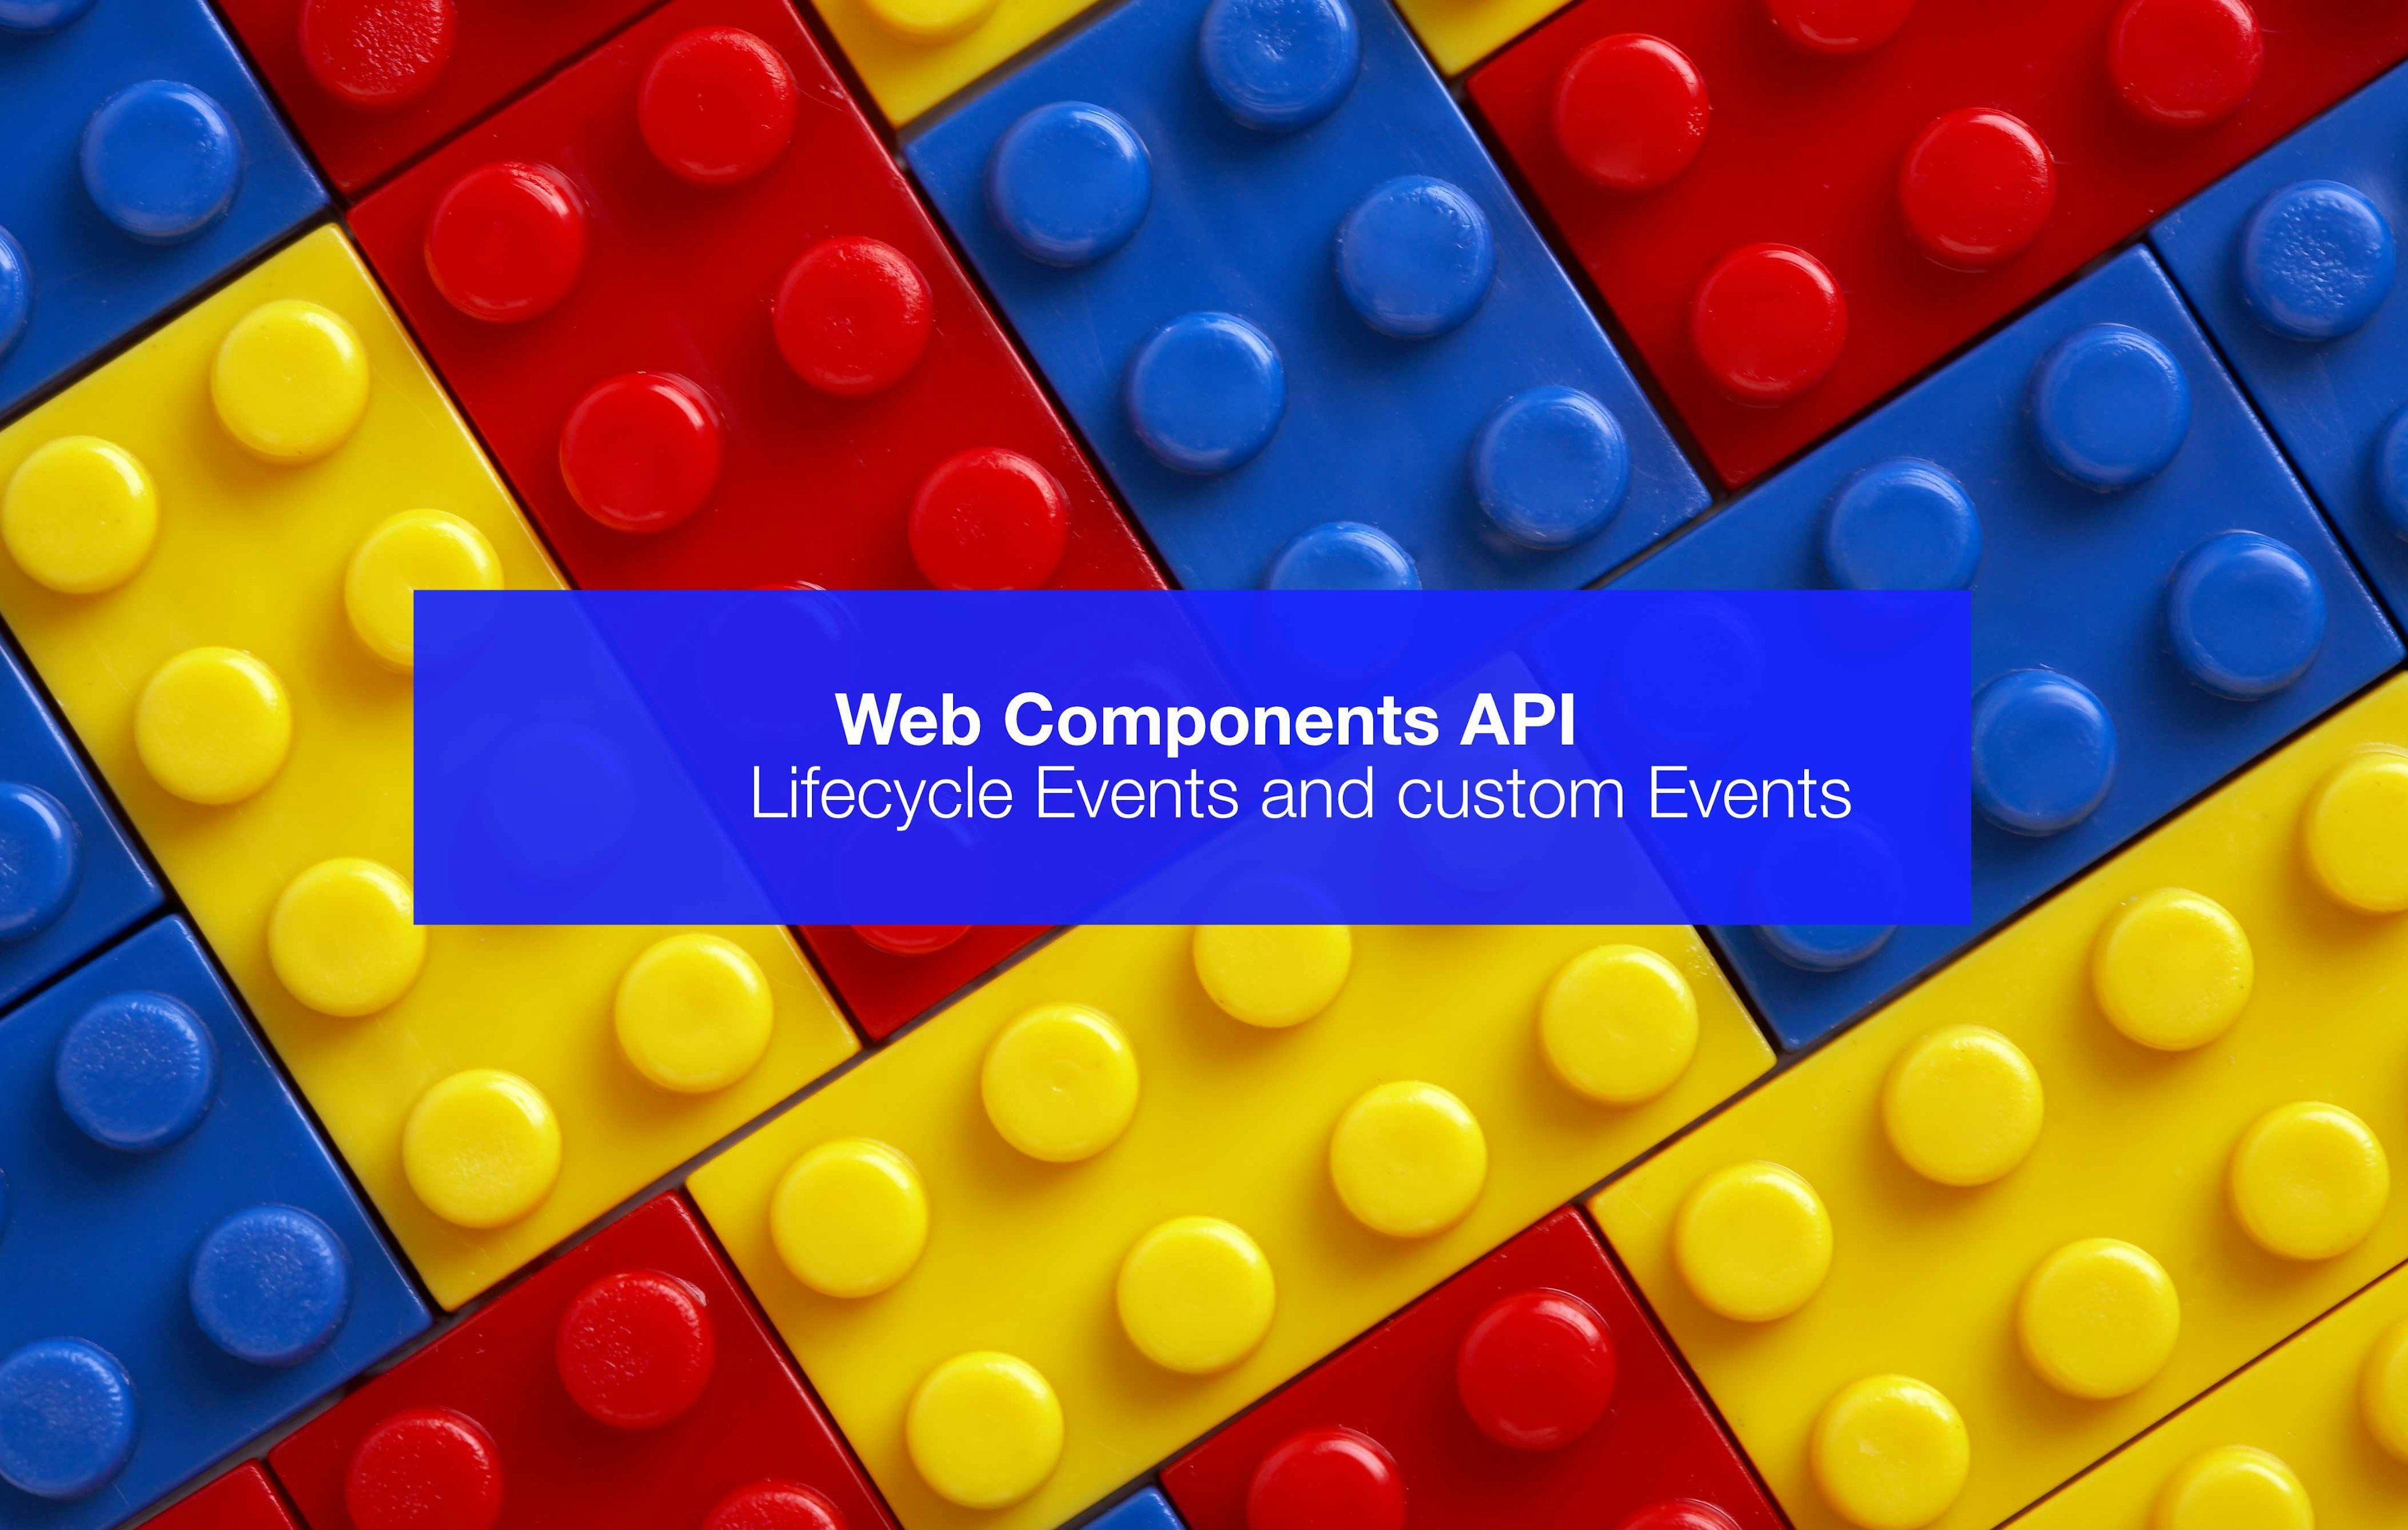 Web Components API: Lifecycle Events and Custom Events